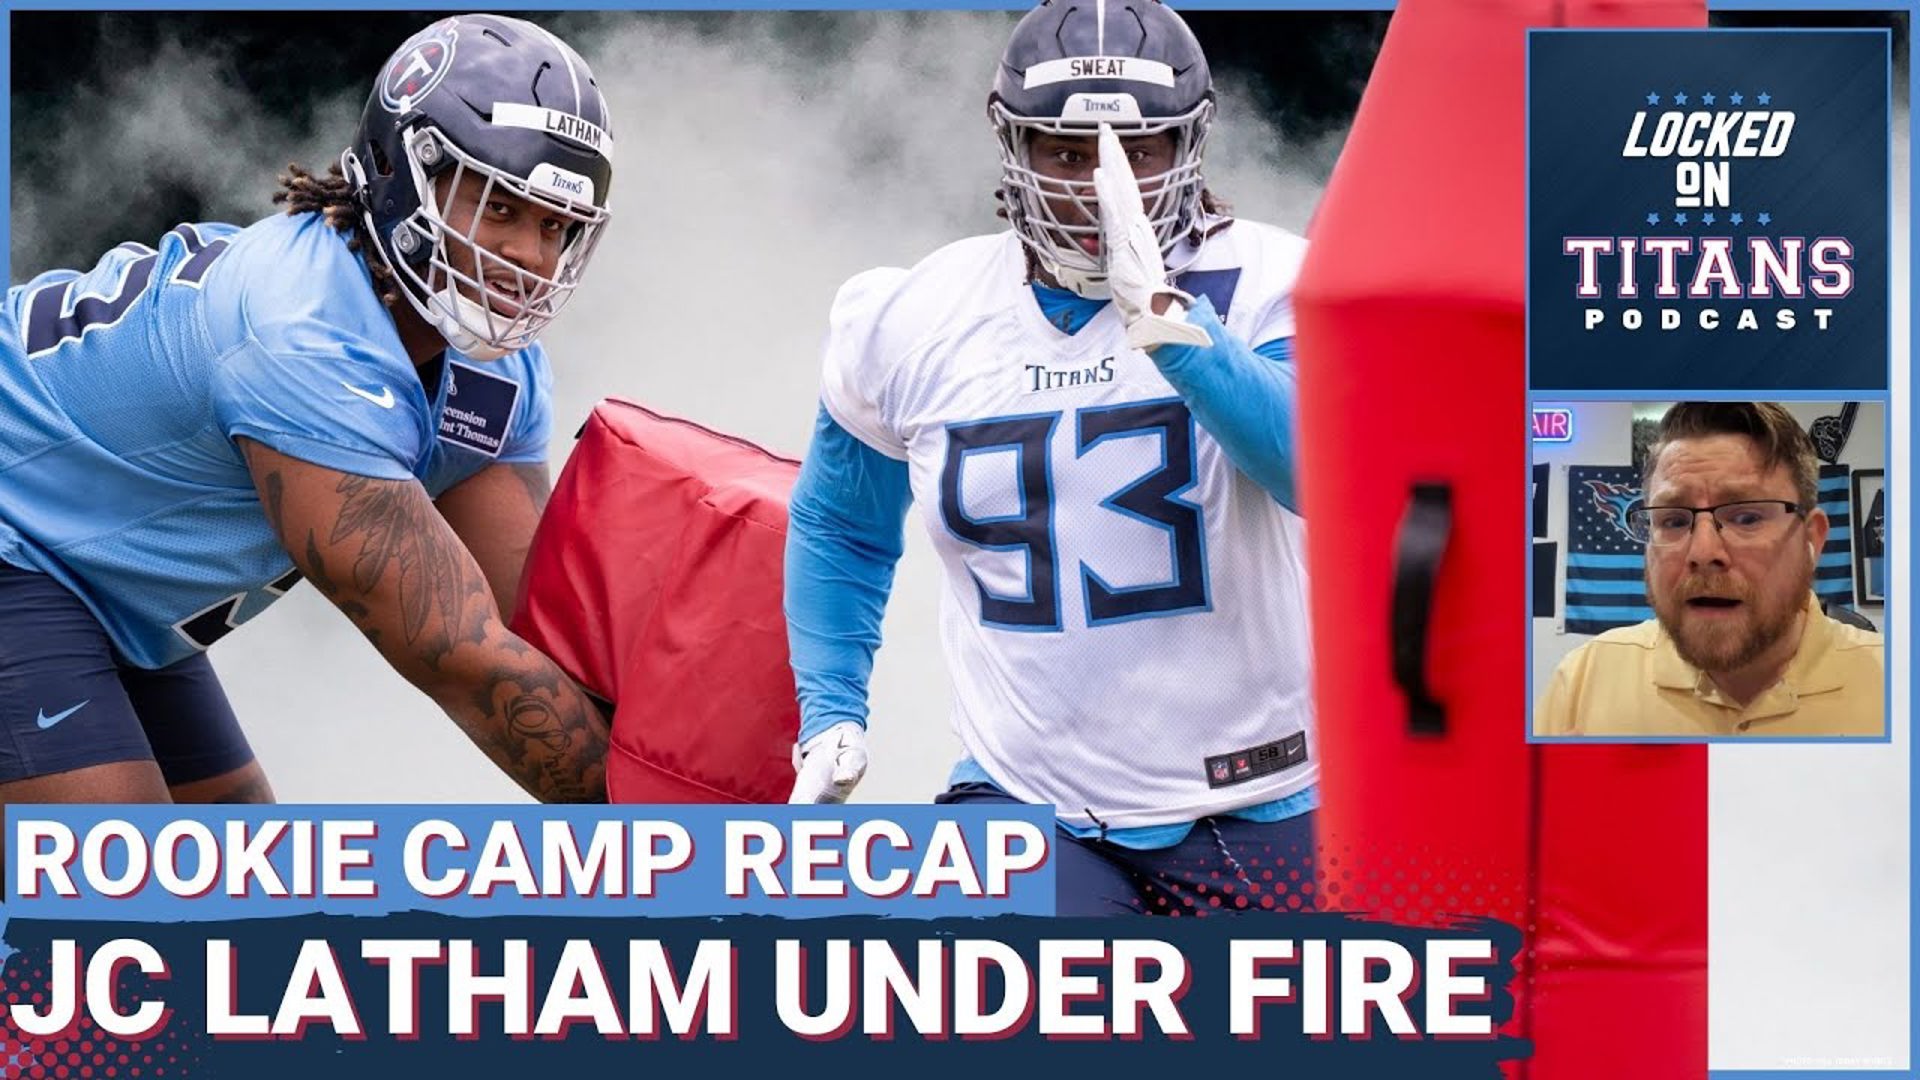 The Tennessee Titans completed their rookie mini-camp over the weekend and JC Latham is already under fire